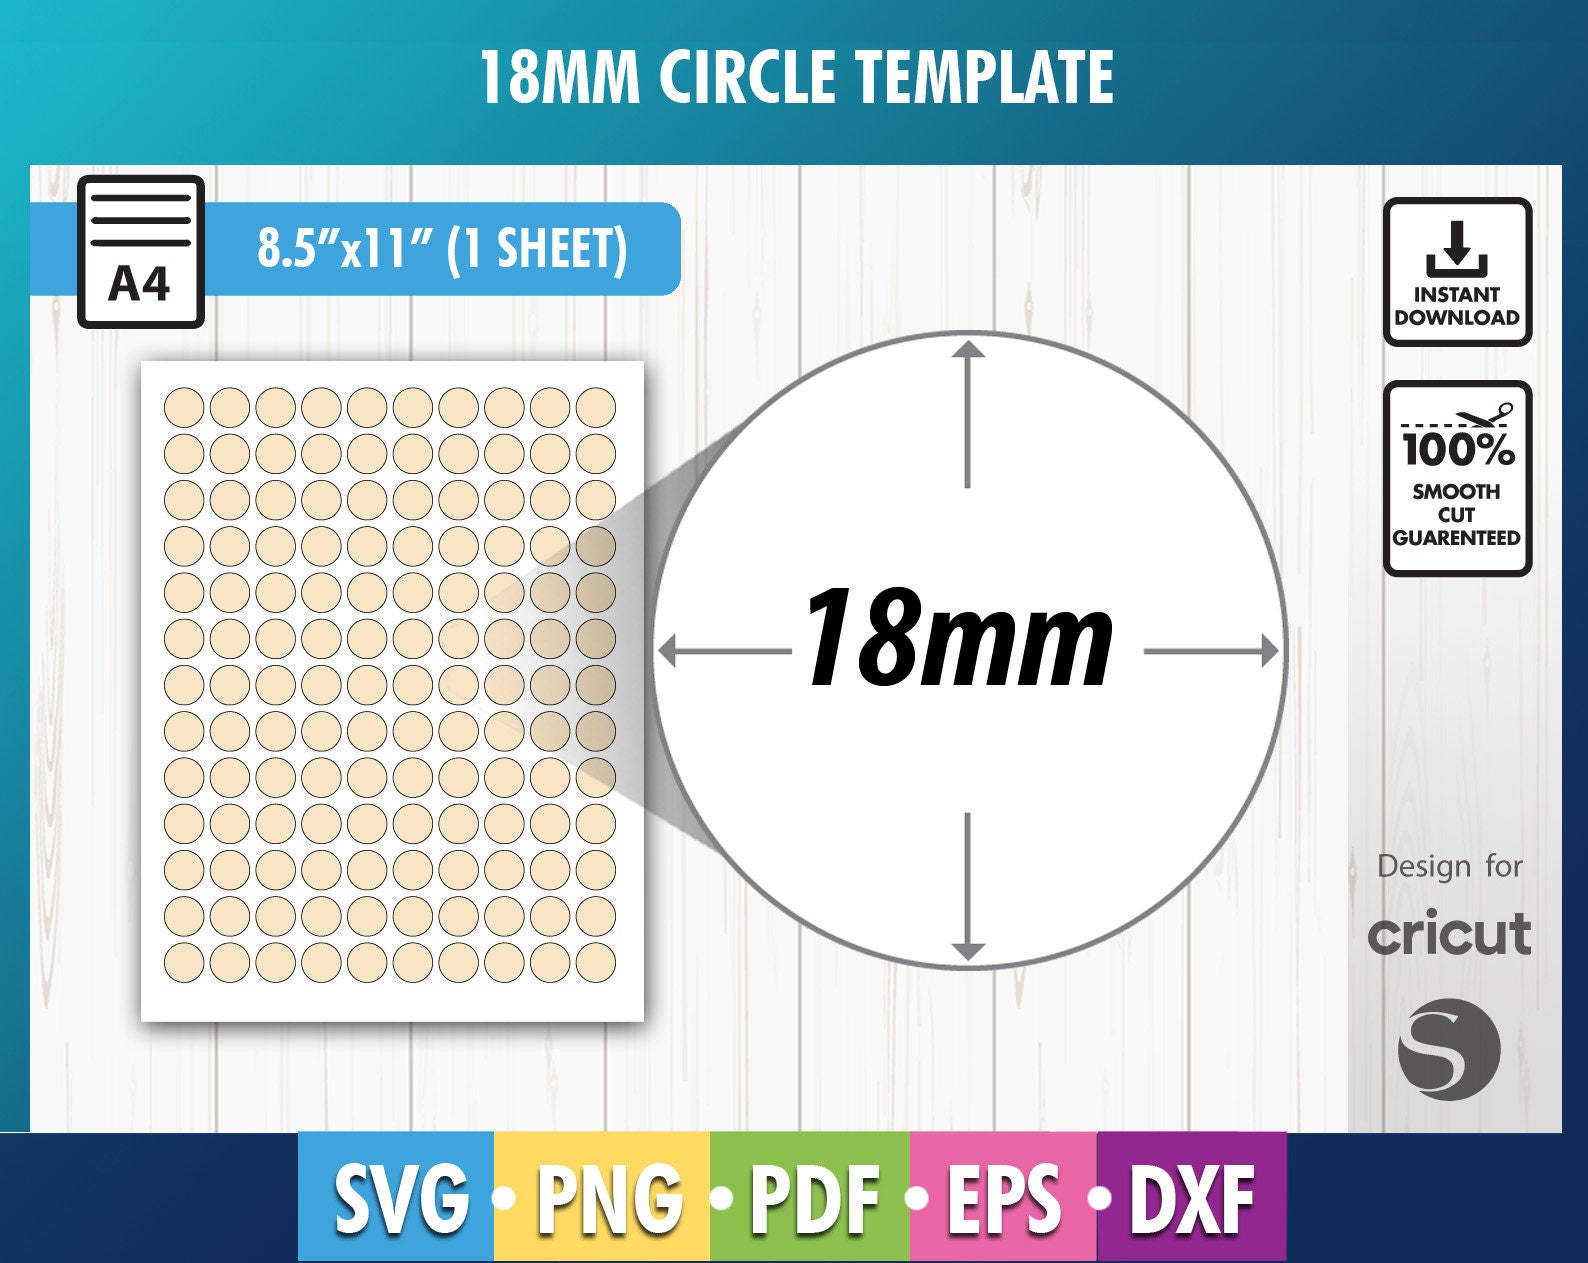 1.25 Inch Round Clear Epoxy Stickers, Circle 3D Epoxy Dome Lens Stickers  31.8mm Clear Resin Stickers 